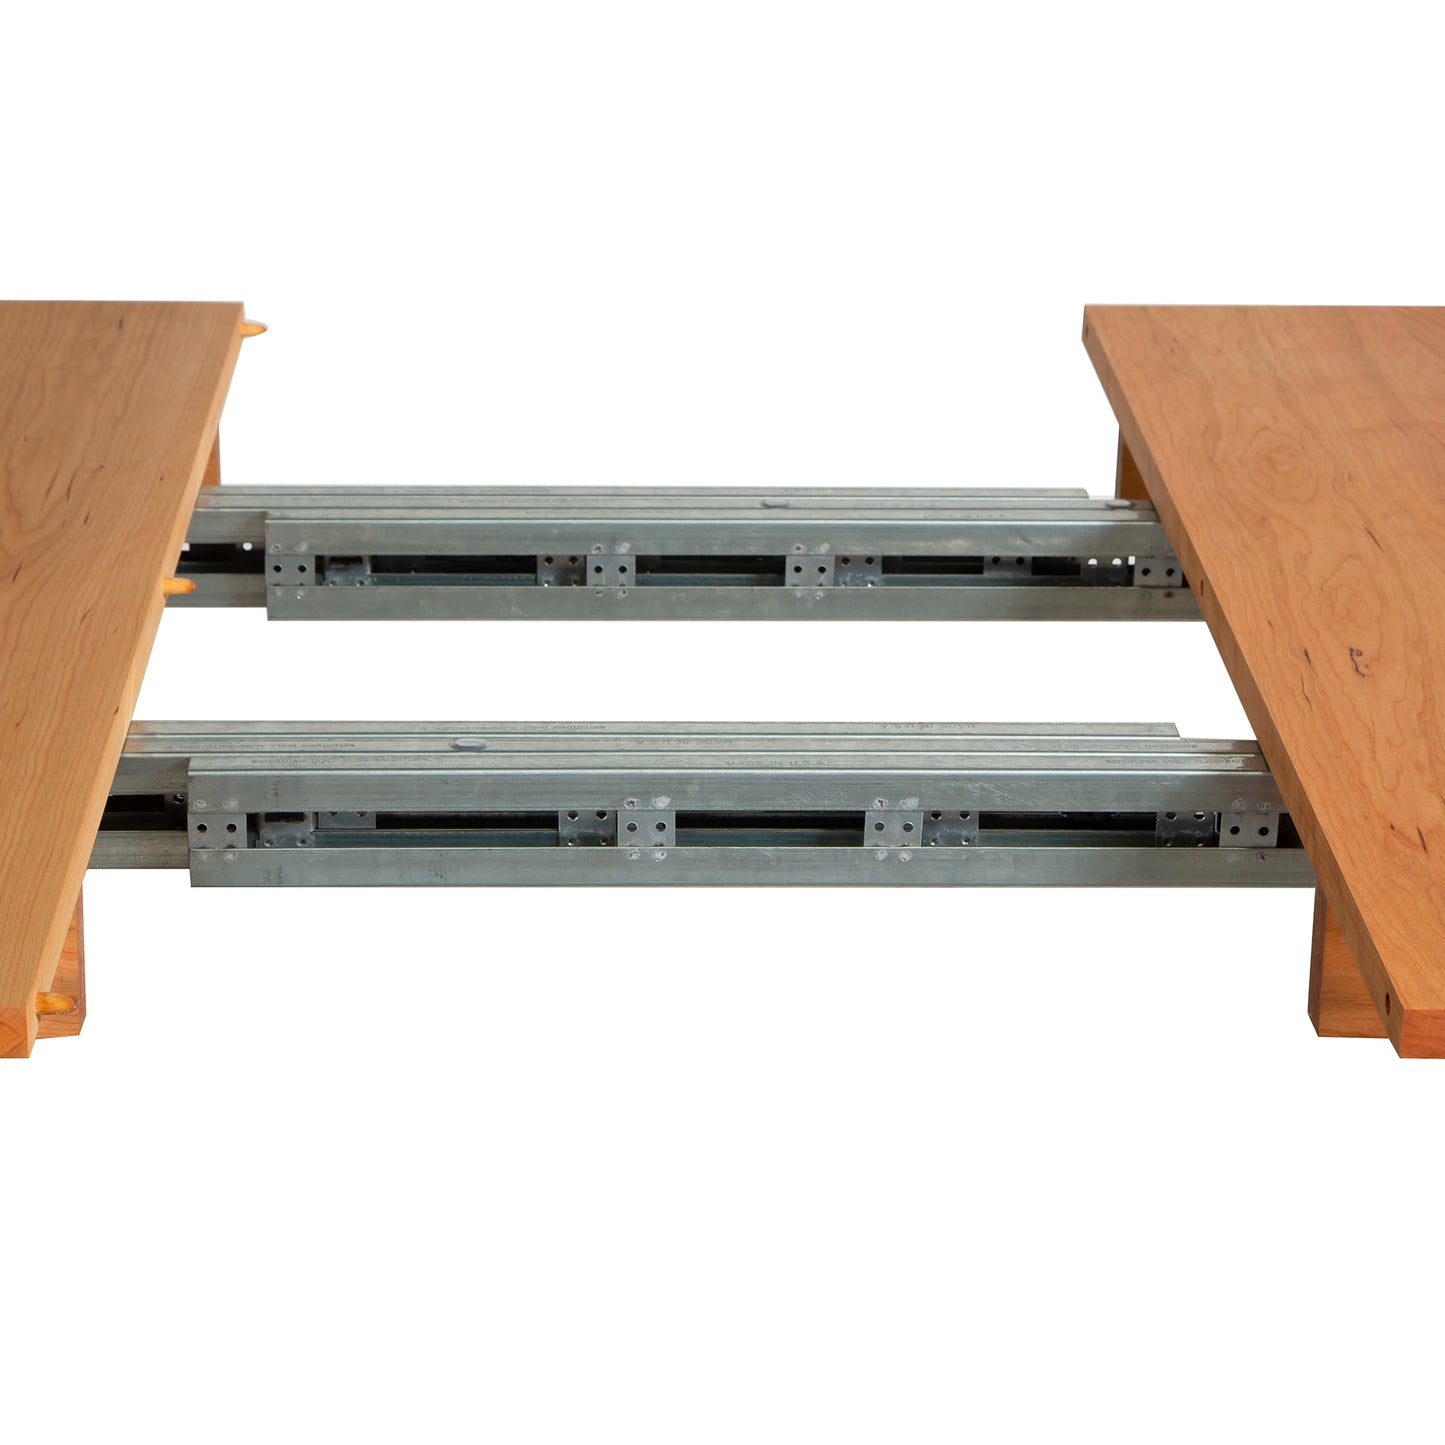 A Burlington Shaker Extension Dining Table - Floor Model by Vermont Furniture Designs is partially open, revealing the metal sliding mechanism beneath the tabletop. The environment is a plain white backdrop, emphasizing the structure of the table.